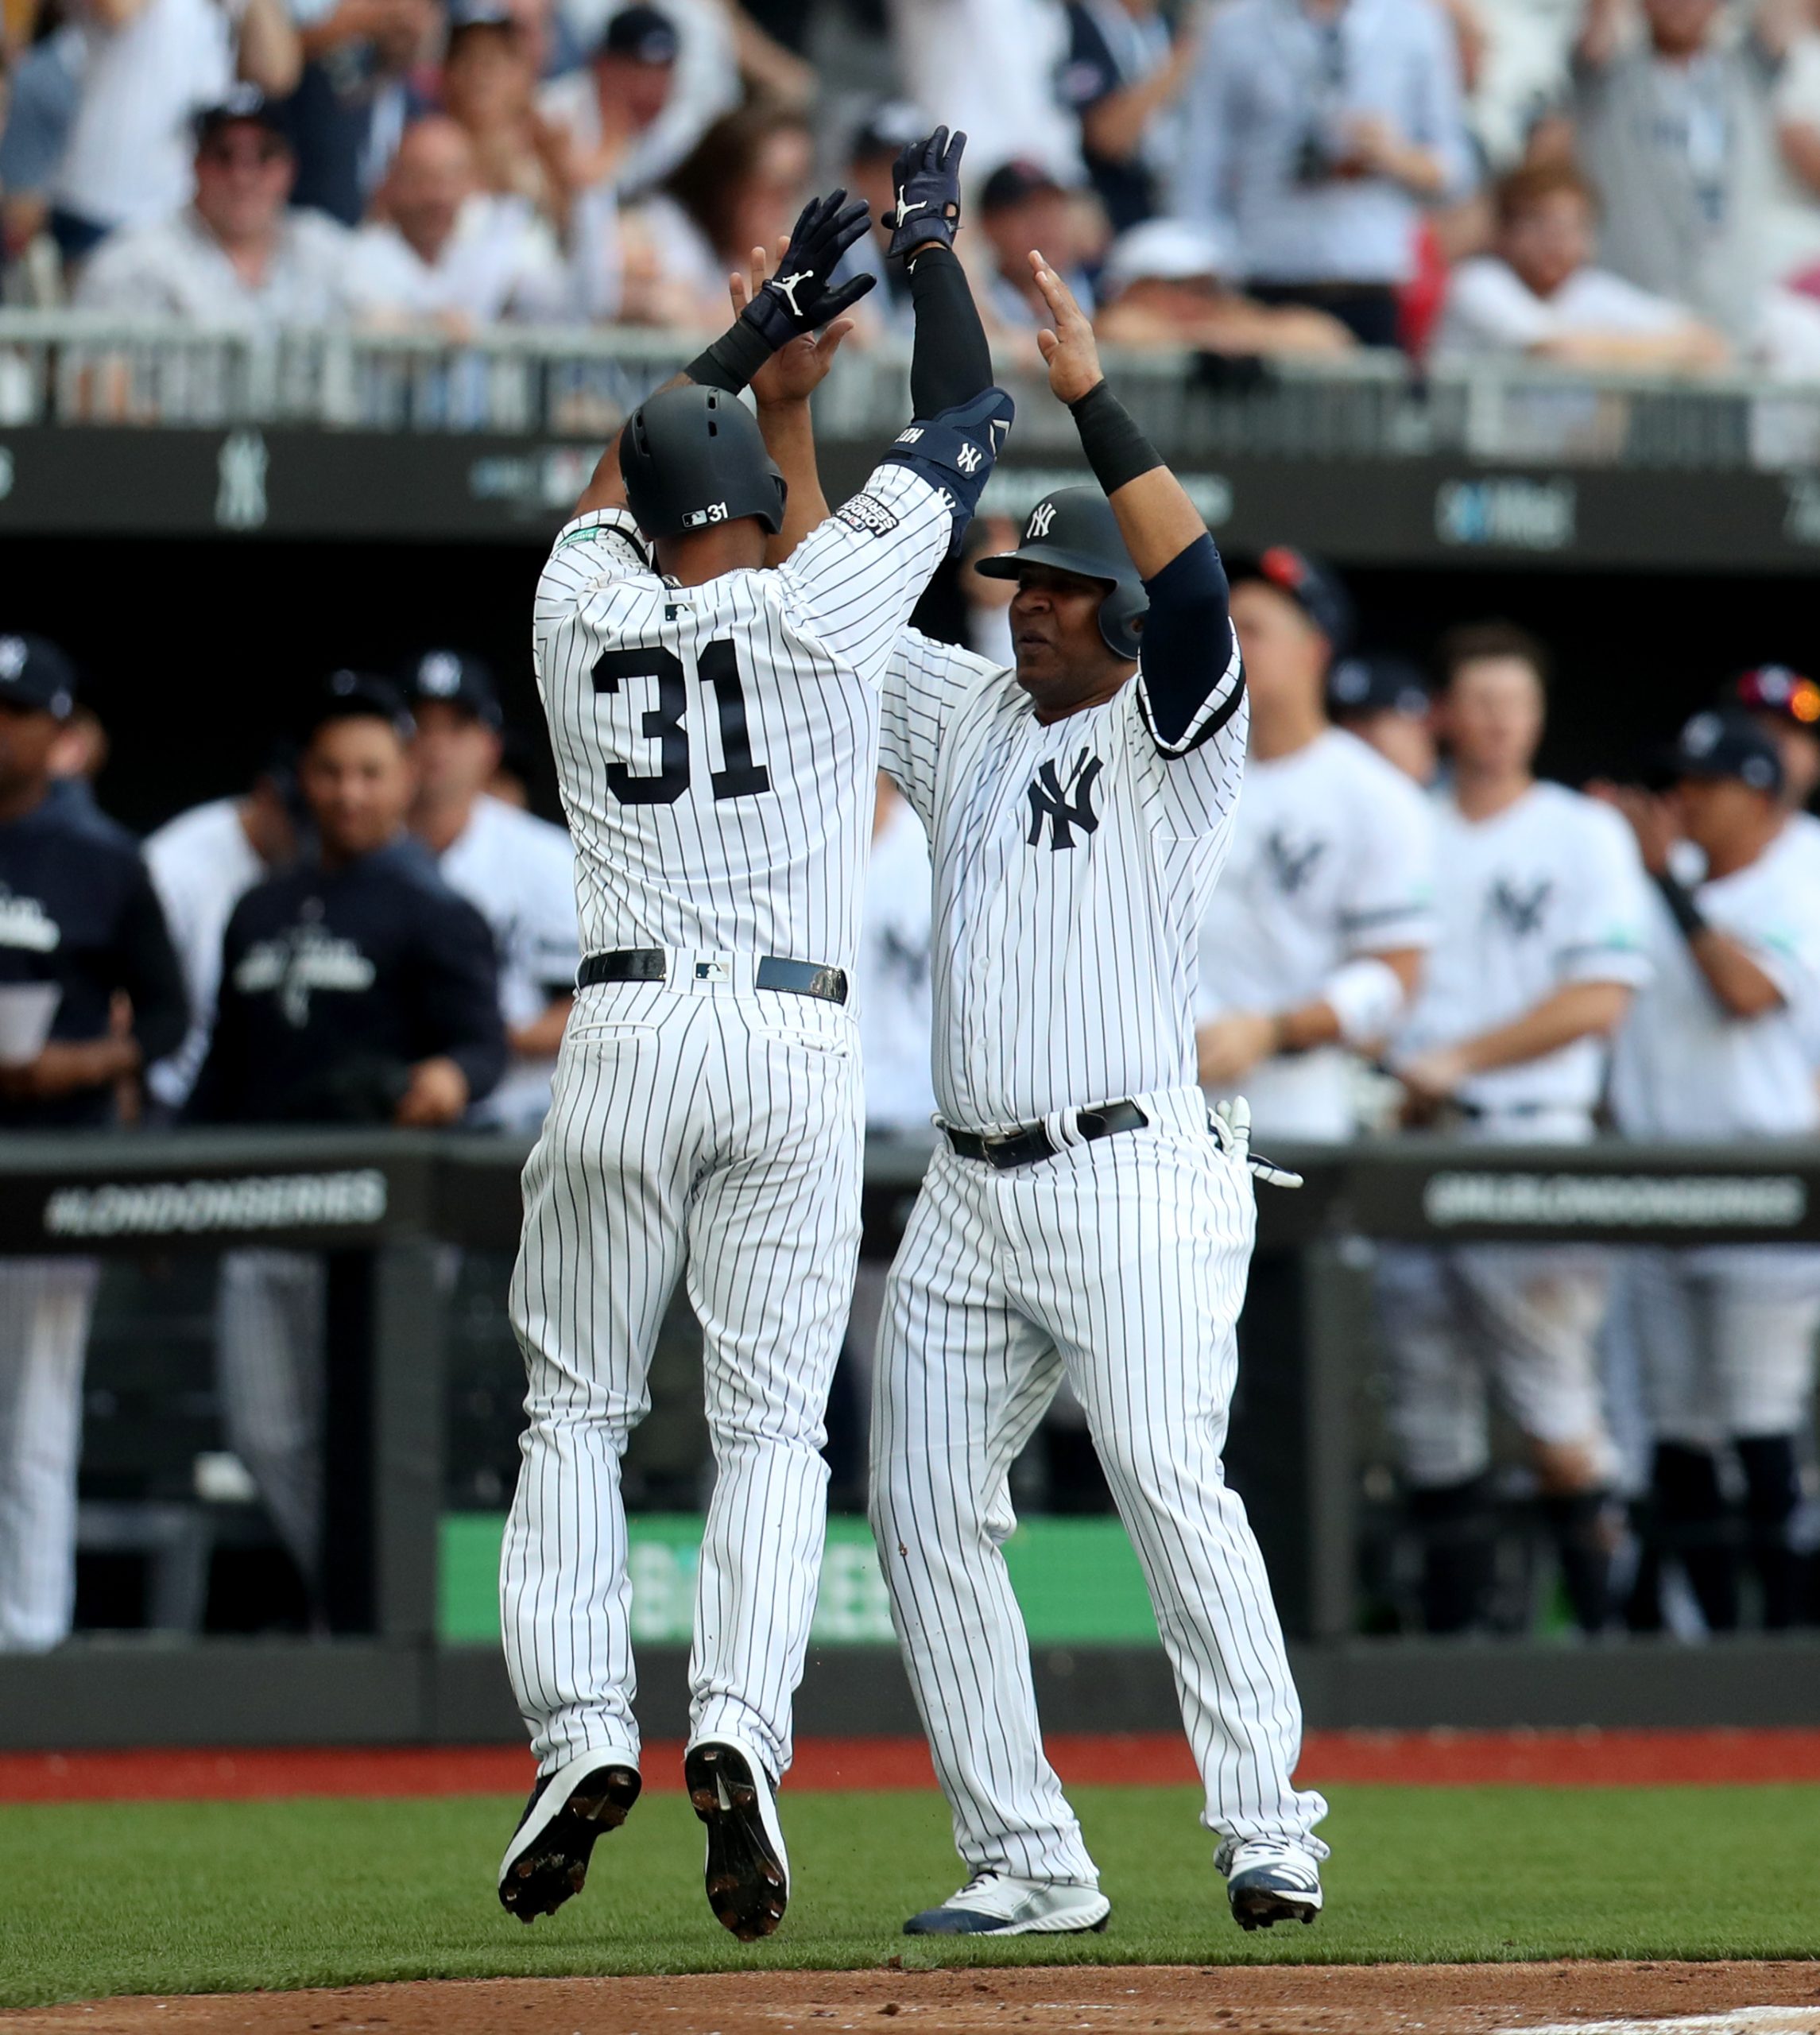 New York Yankees see off Boston Red Sox in run-fest at the London Stadium